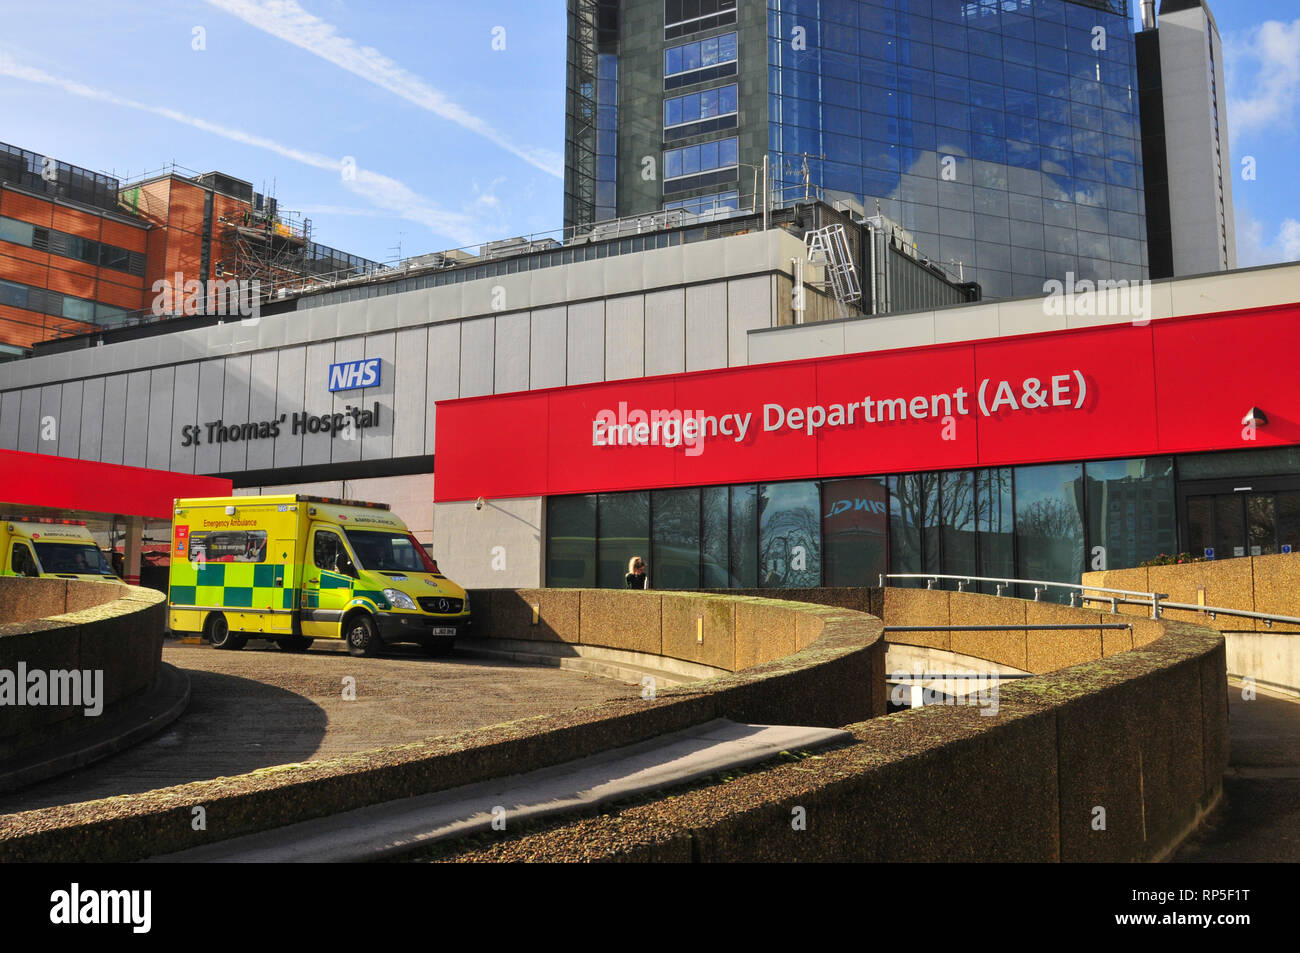 A Mercedes Benz ambulance is parked outside St Thomas' Hospital Emergency Department (A&E) in London on a sunny day. Stock Photo